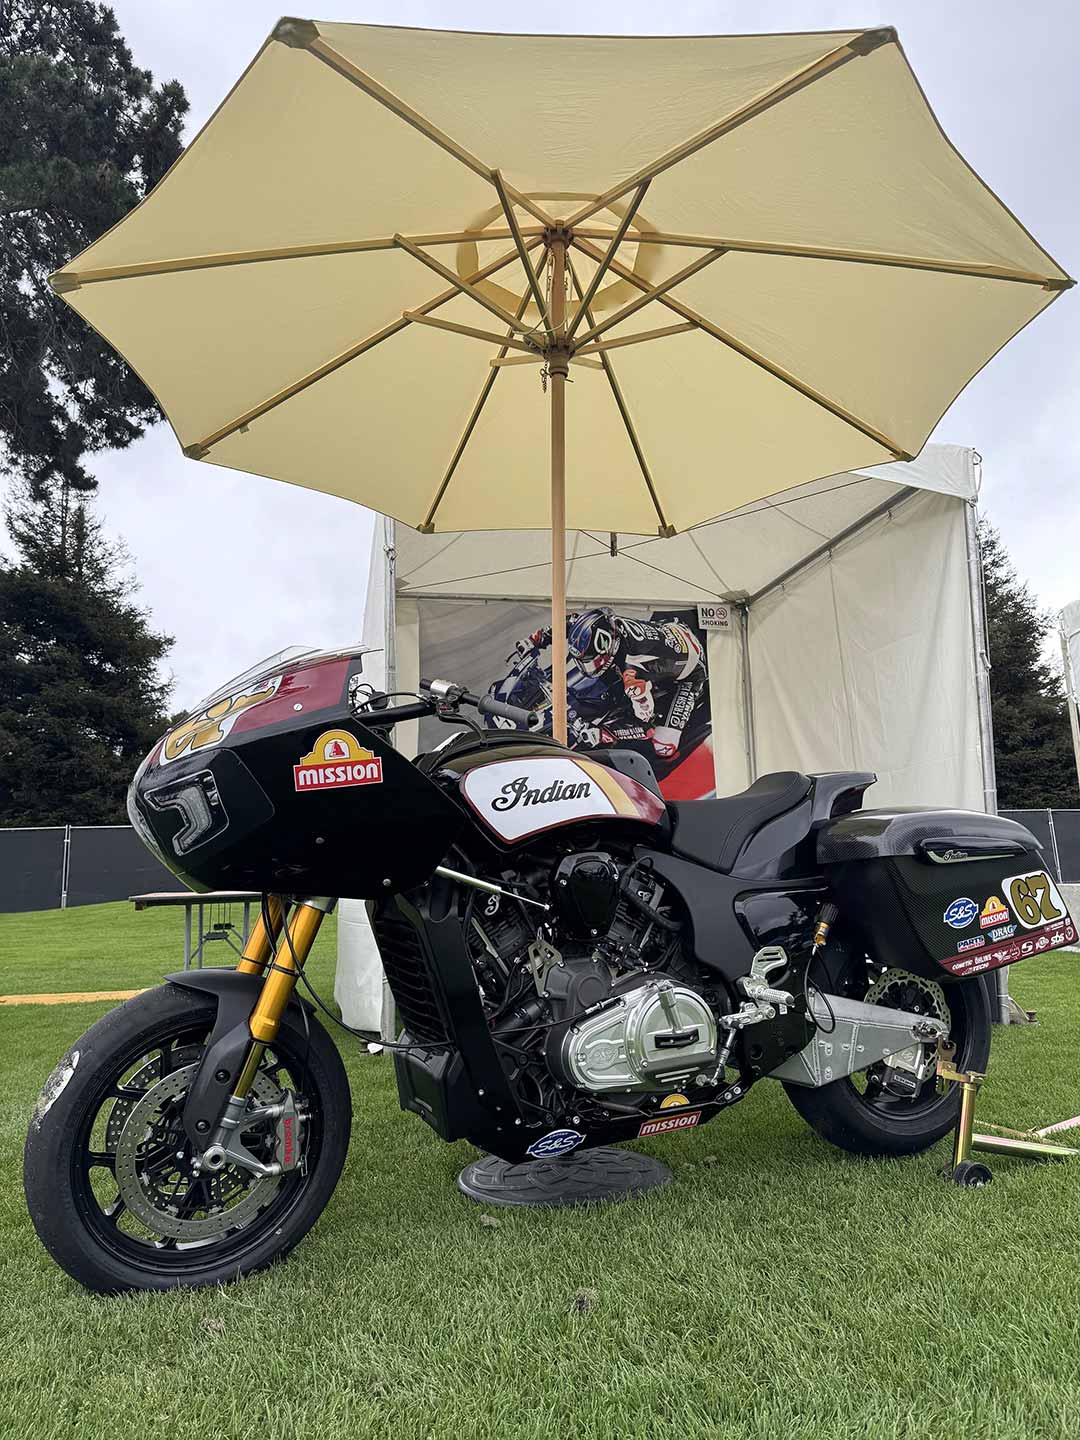 Indian was one of the manufacturers at the Quail with a display, and it brought a King of the Baggers Challenger racebike to show.